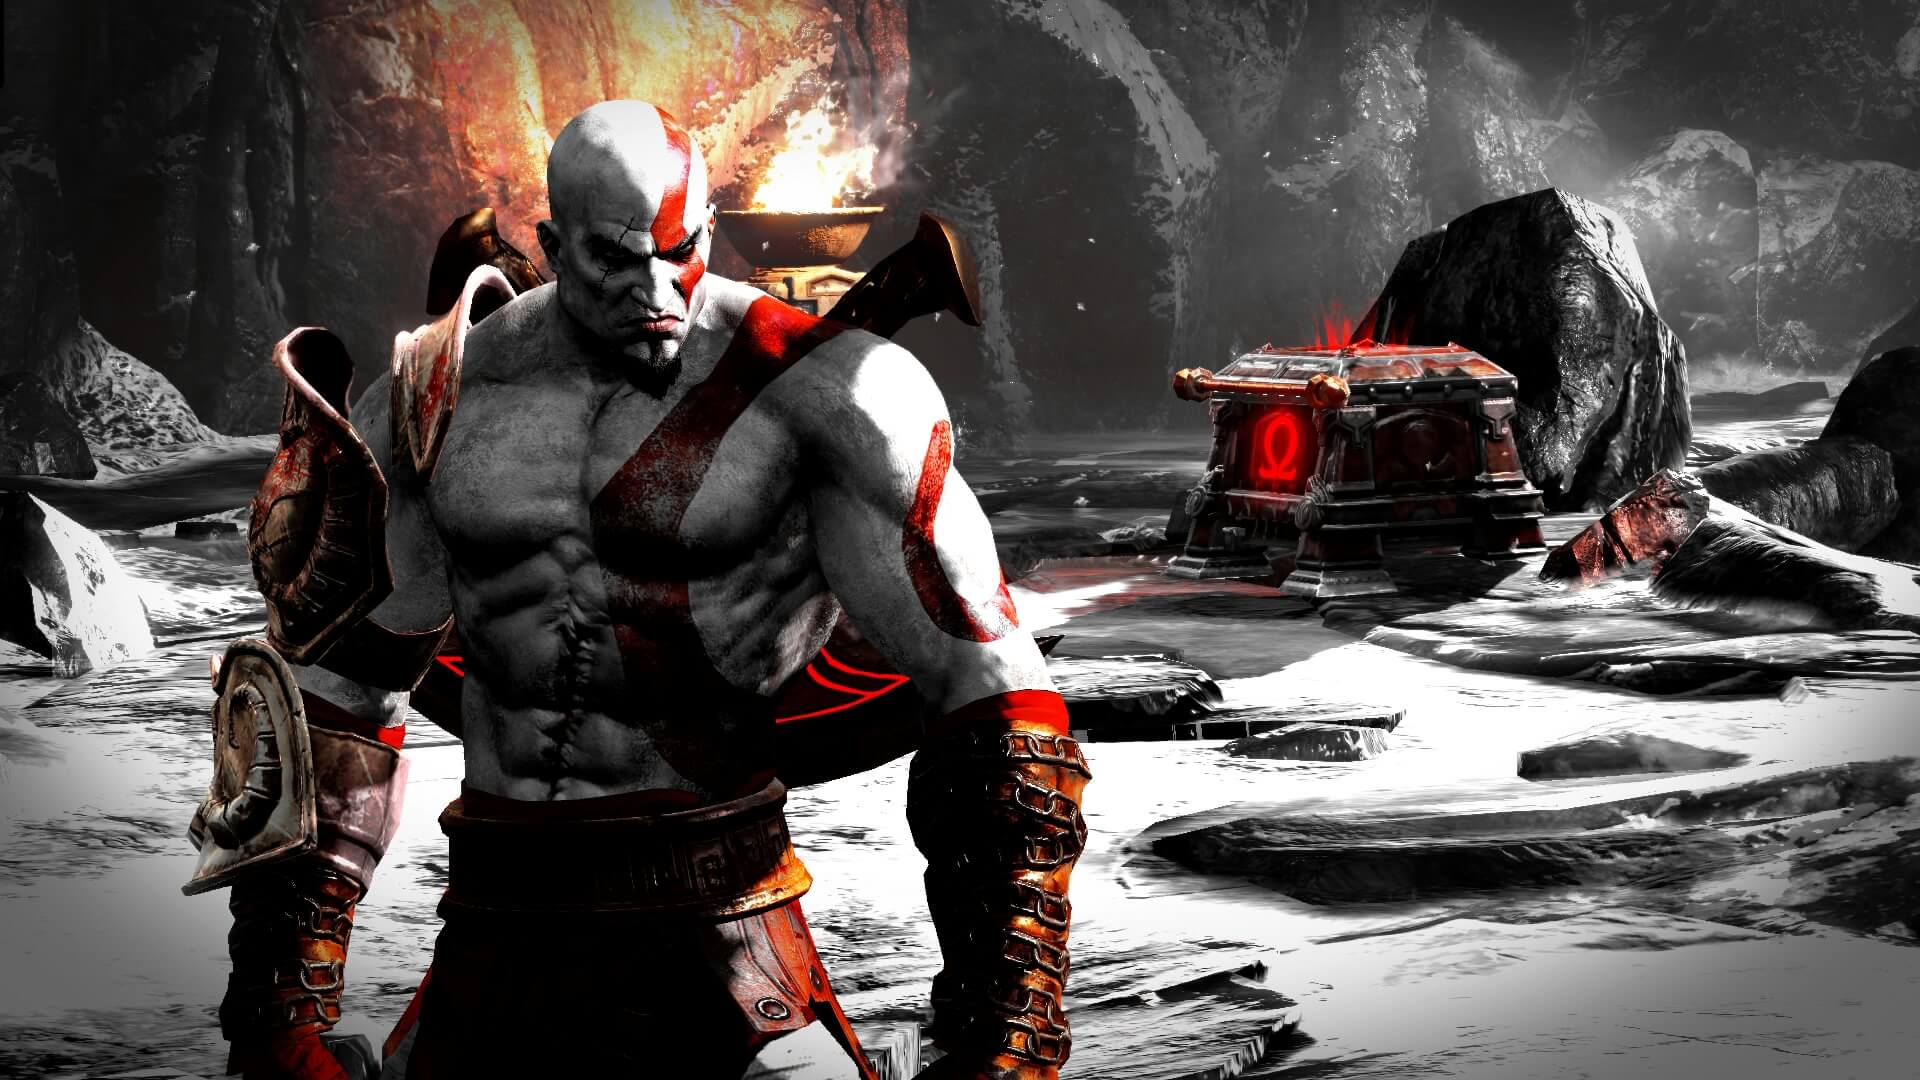 God of War 4 for a 2017 release date